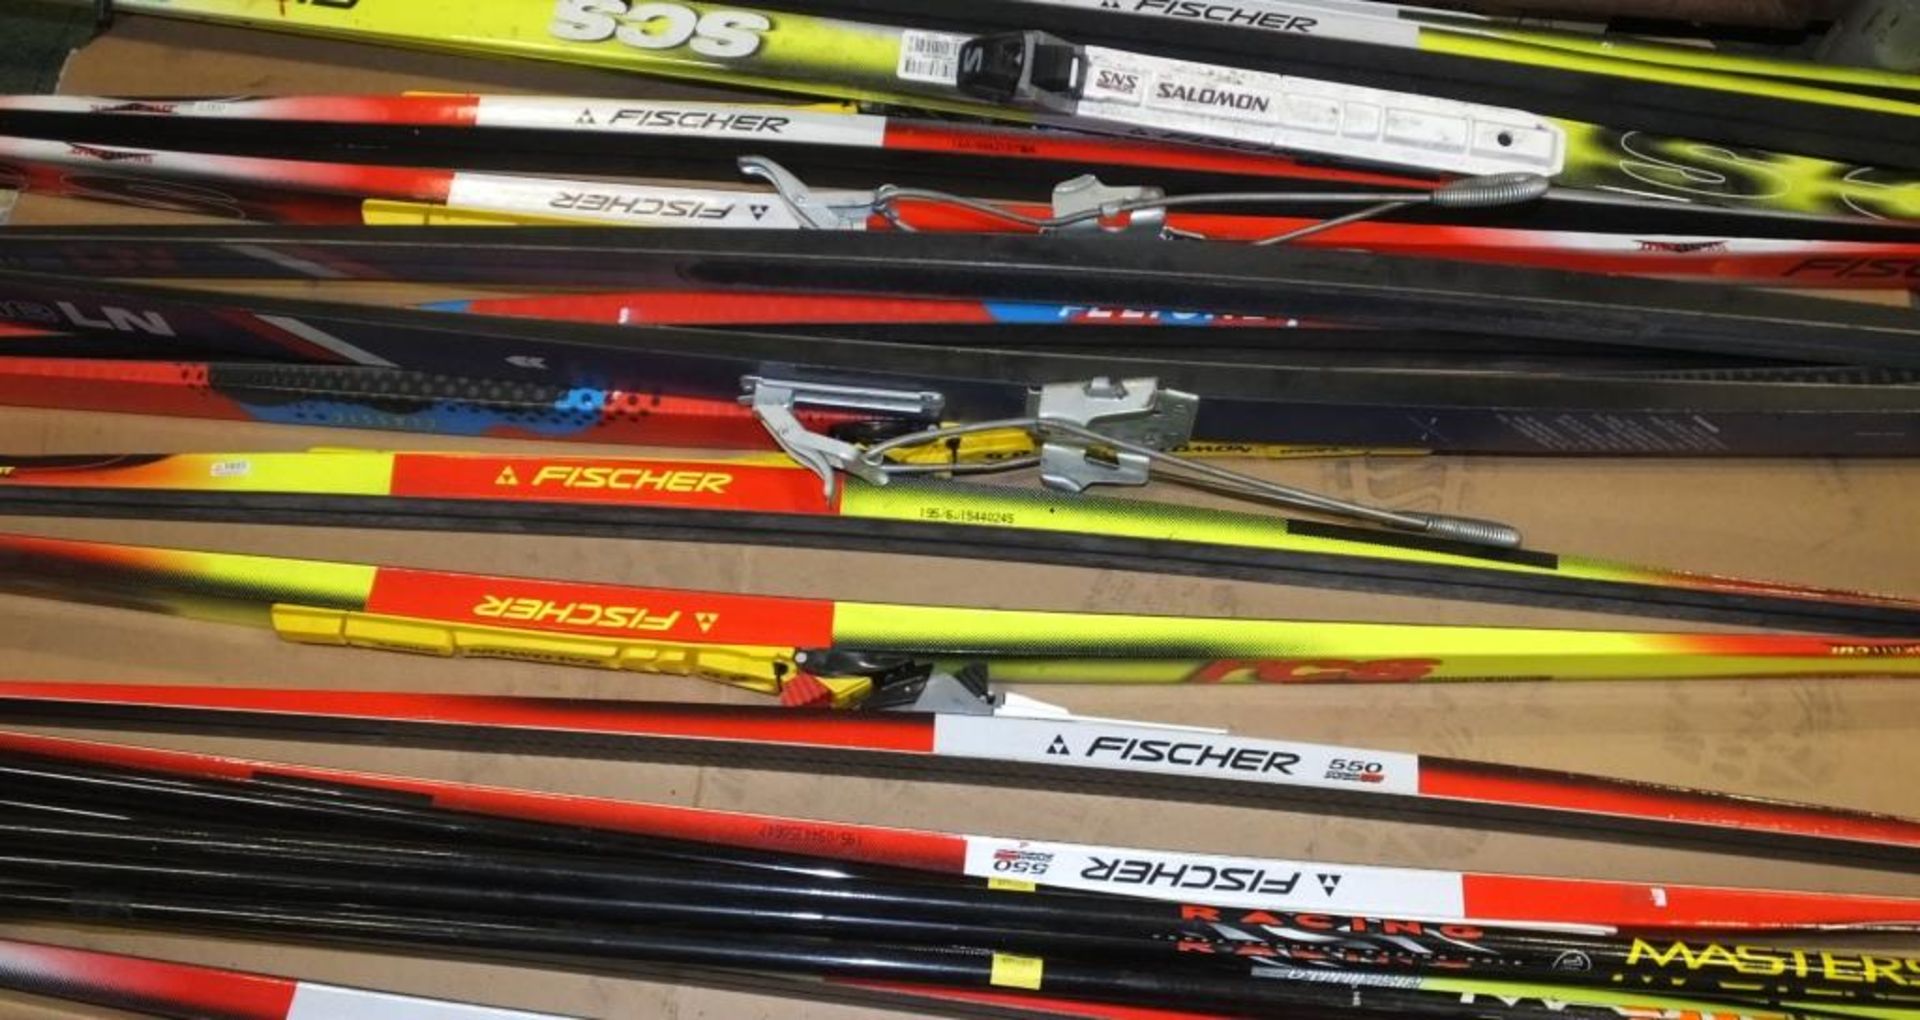 9x Pairs of Cross Country Ski's, Cross Country Ski Poles - Image 2 of 2